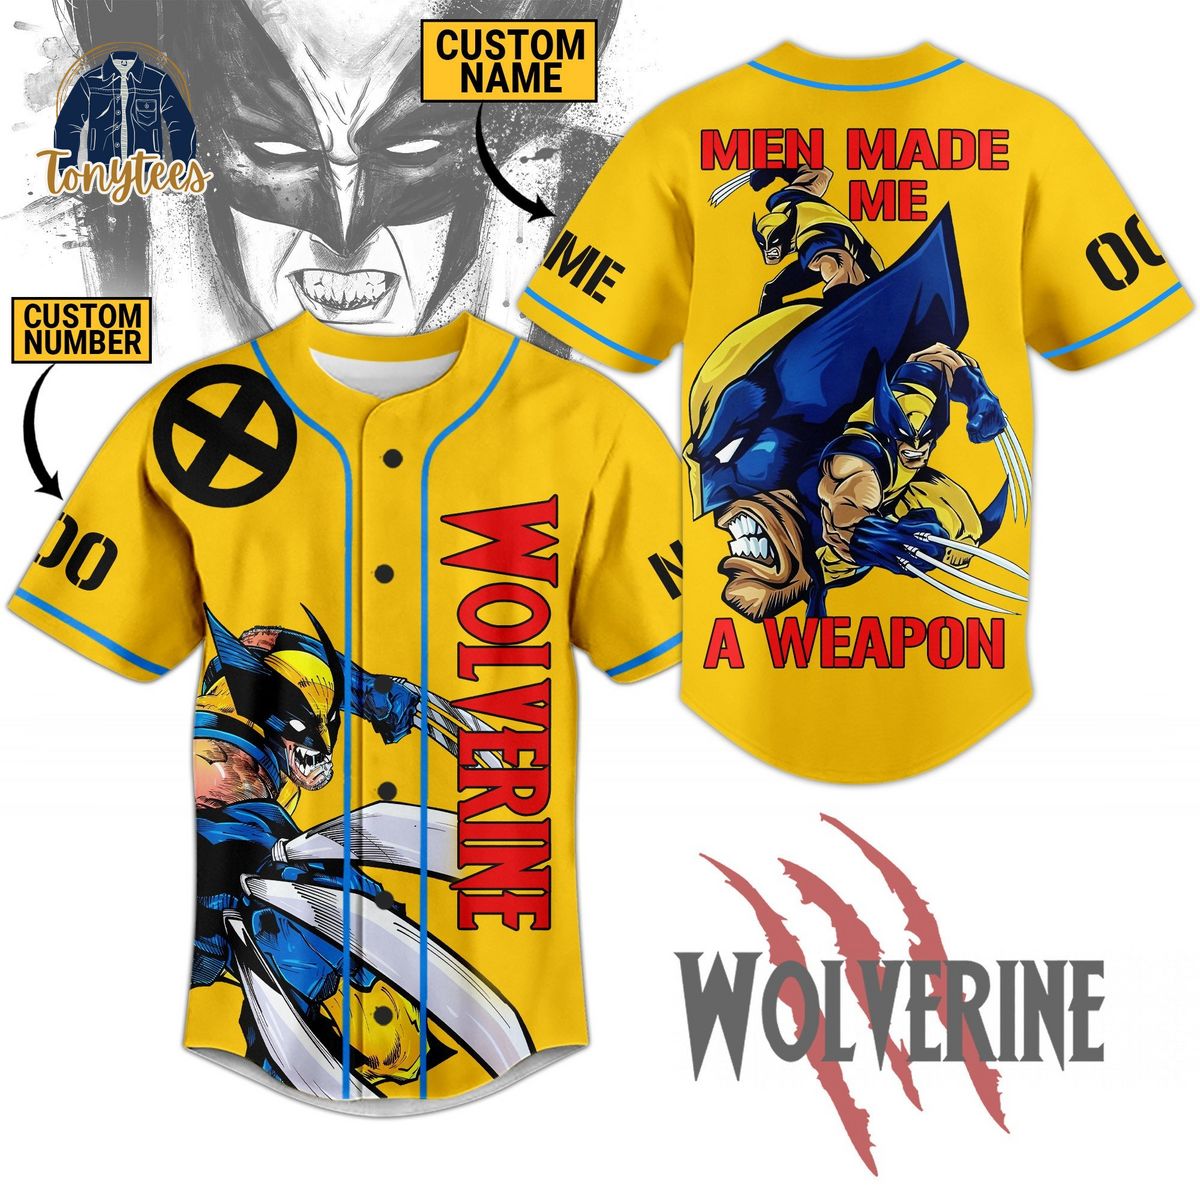 Personalized Wolverine Men Made Me A Weapon Baseball Jersey